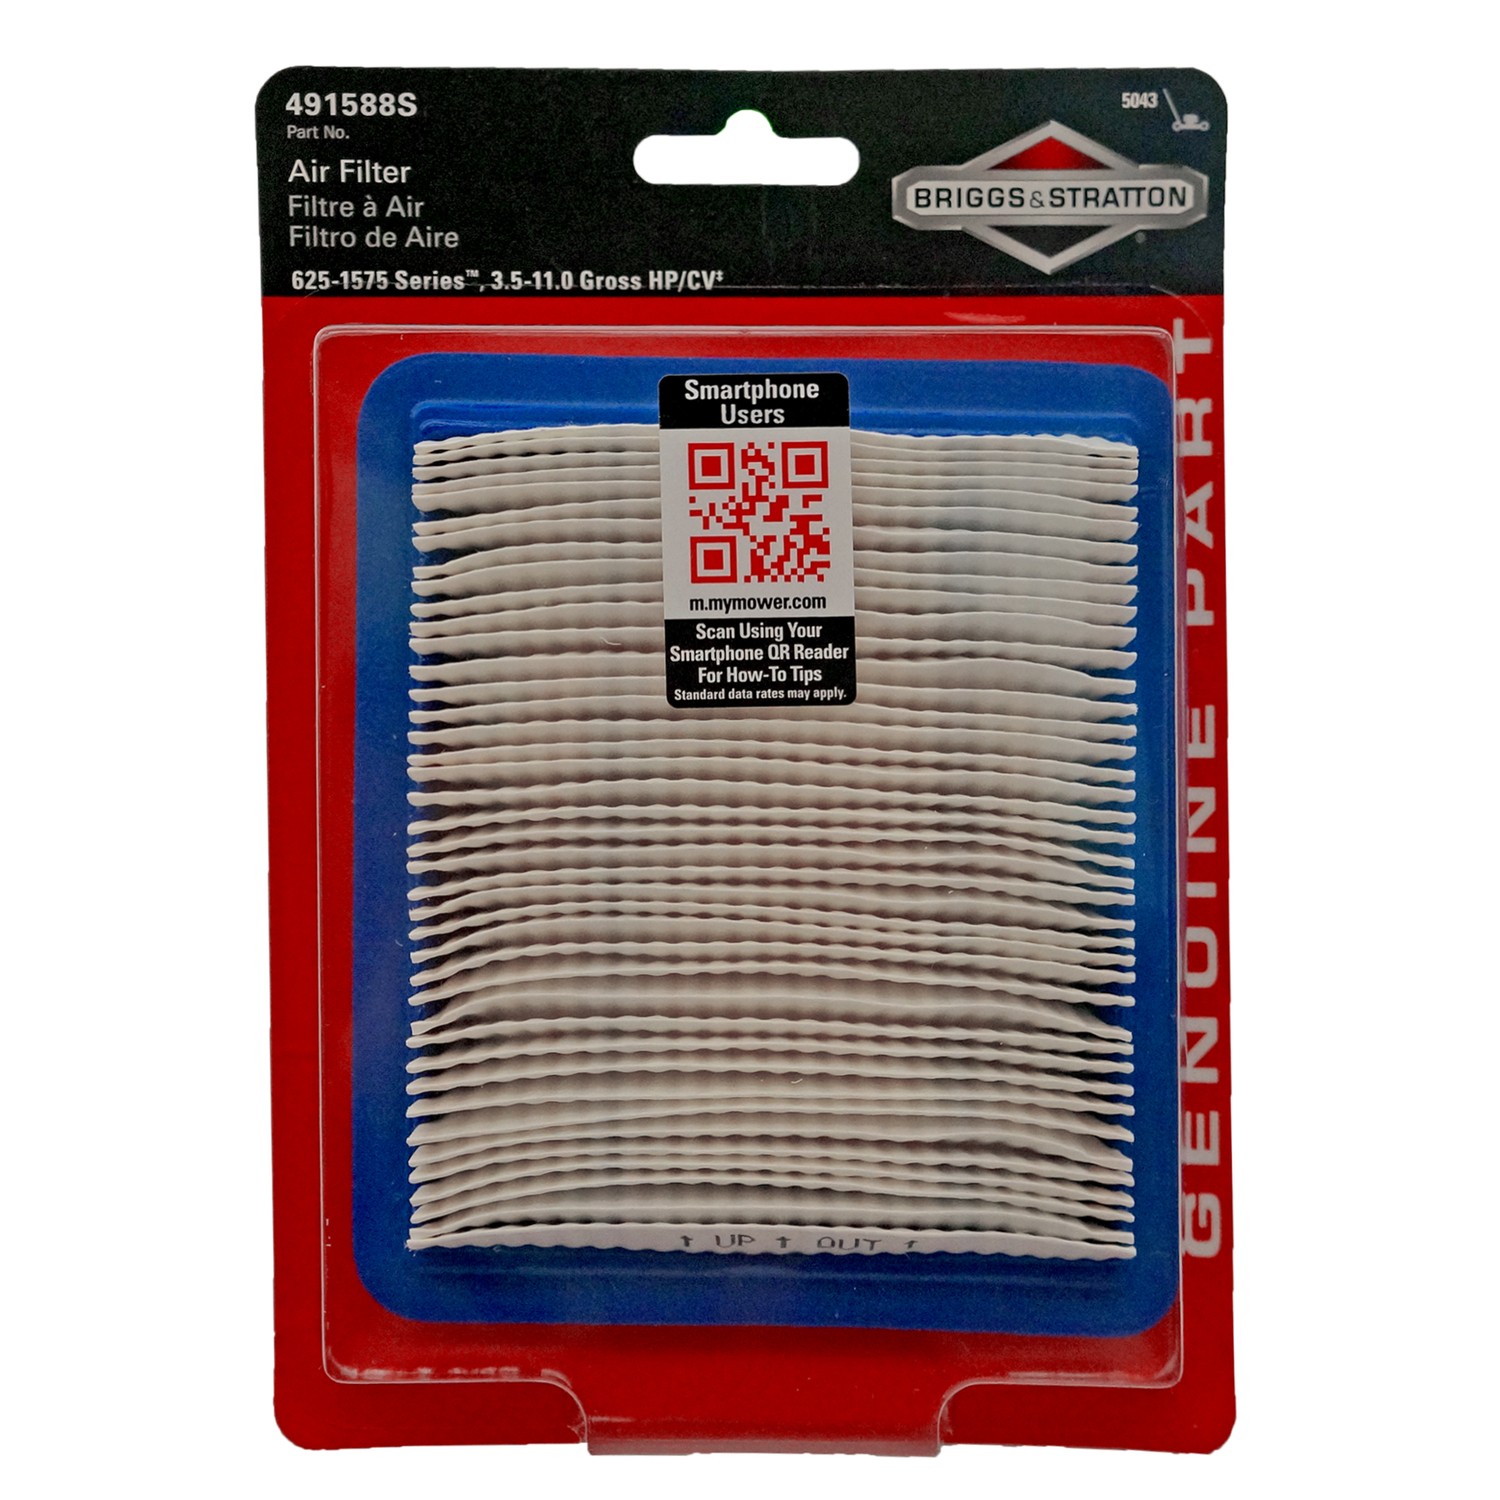 Briggs & Stratton Small Engine Air Filter - Ace Hardware